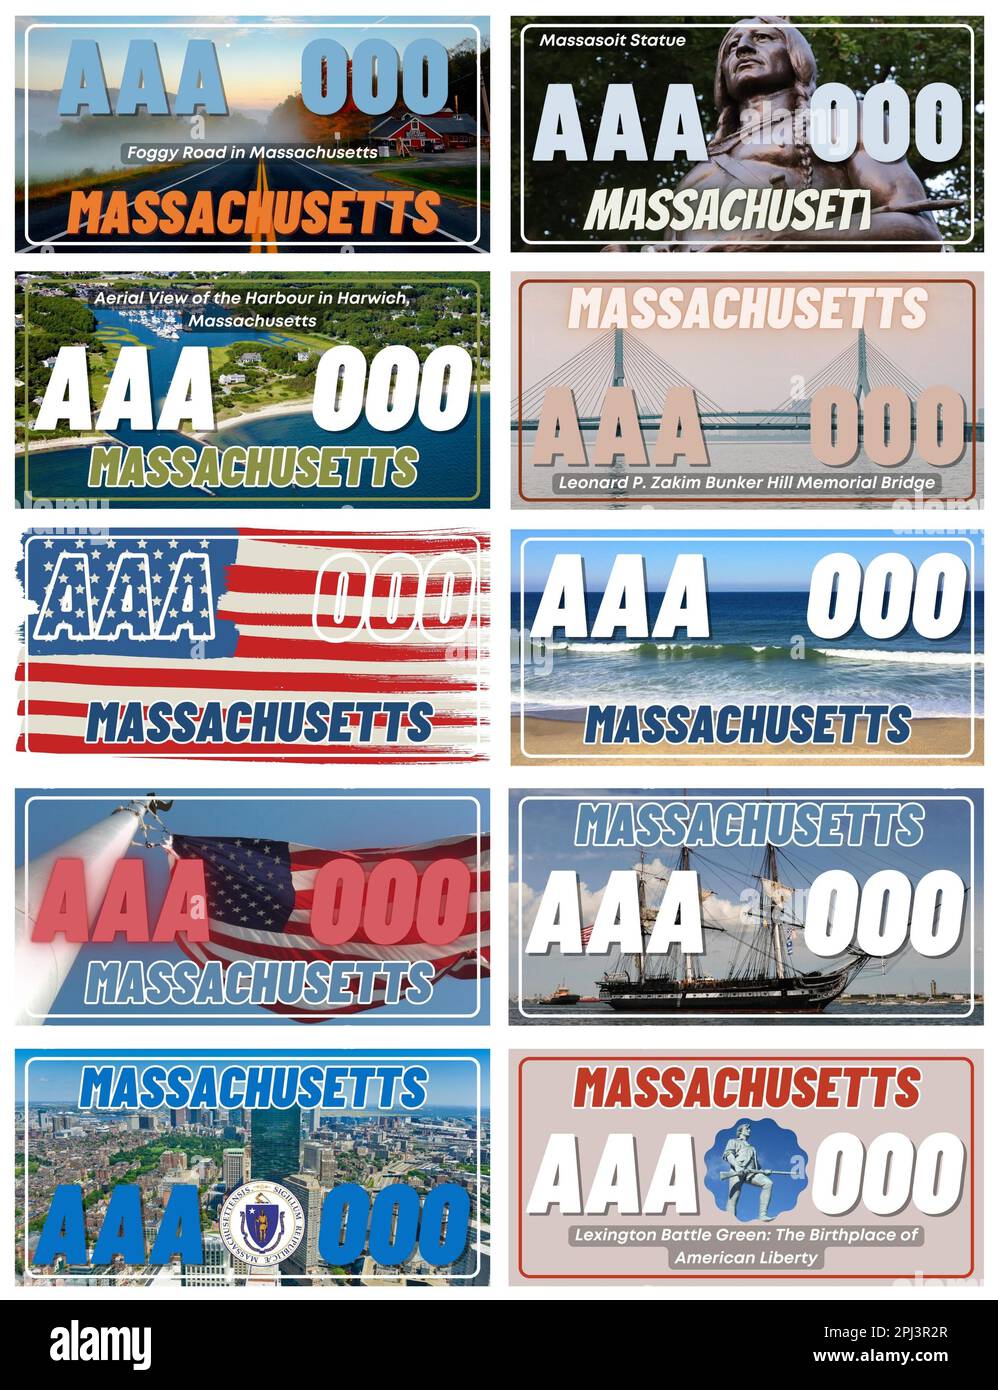 Complete Set 10 Massa State United States License Plates - Massachuset 10 USA States, Special Design And Regulation For All States, Car numbers of veh Stock Photo